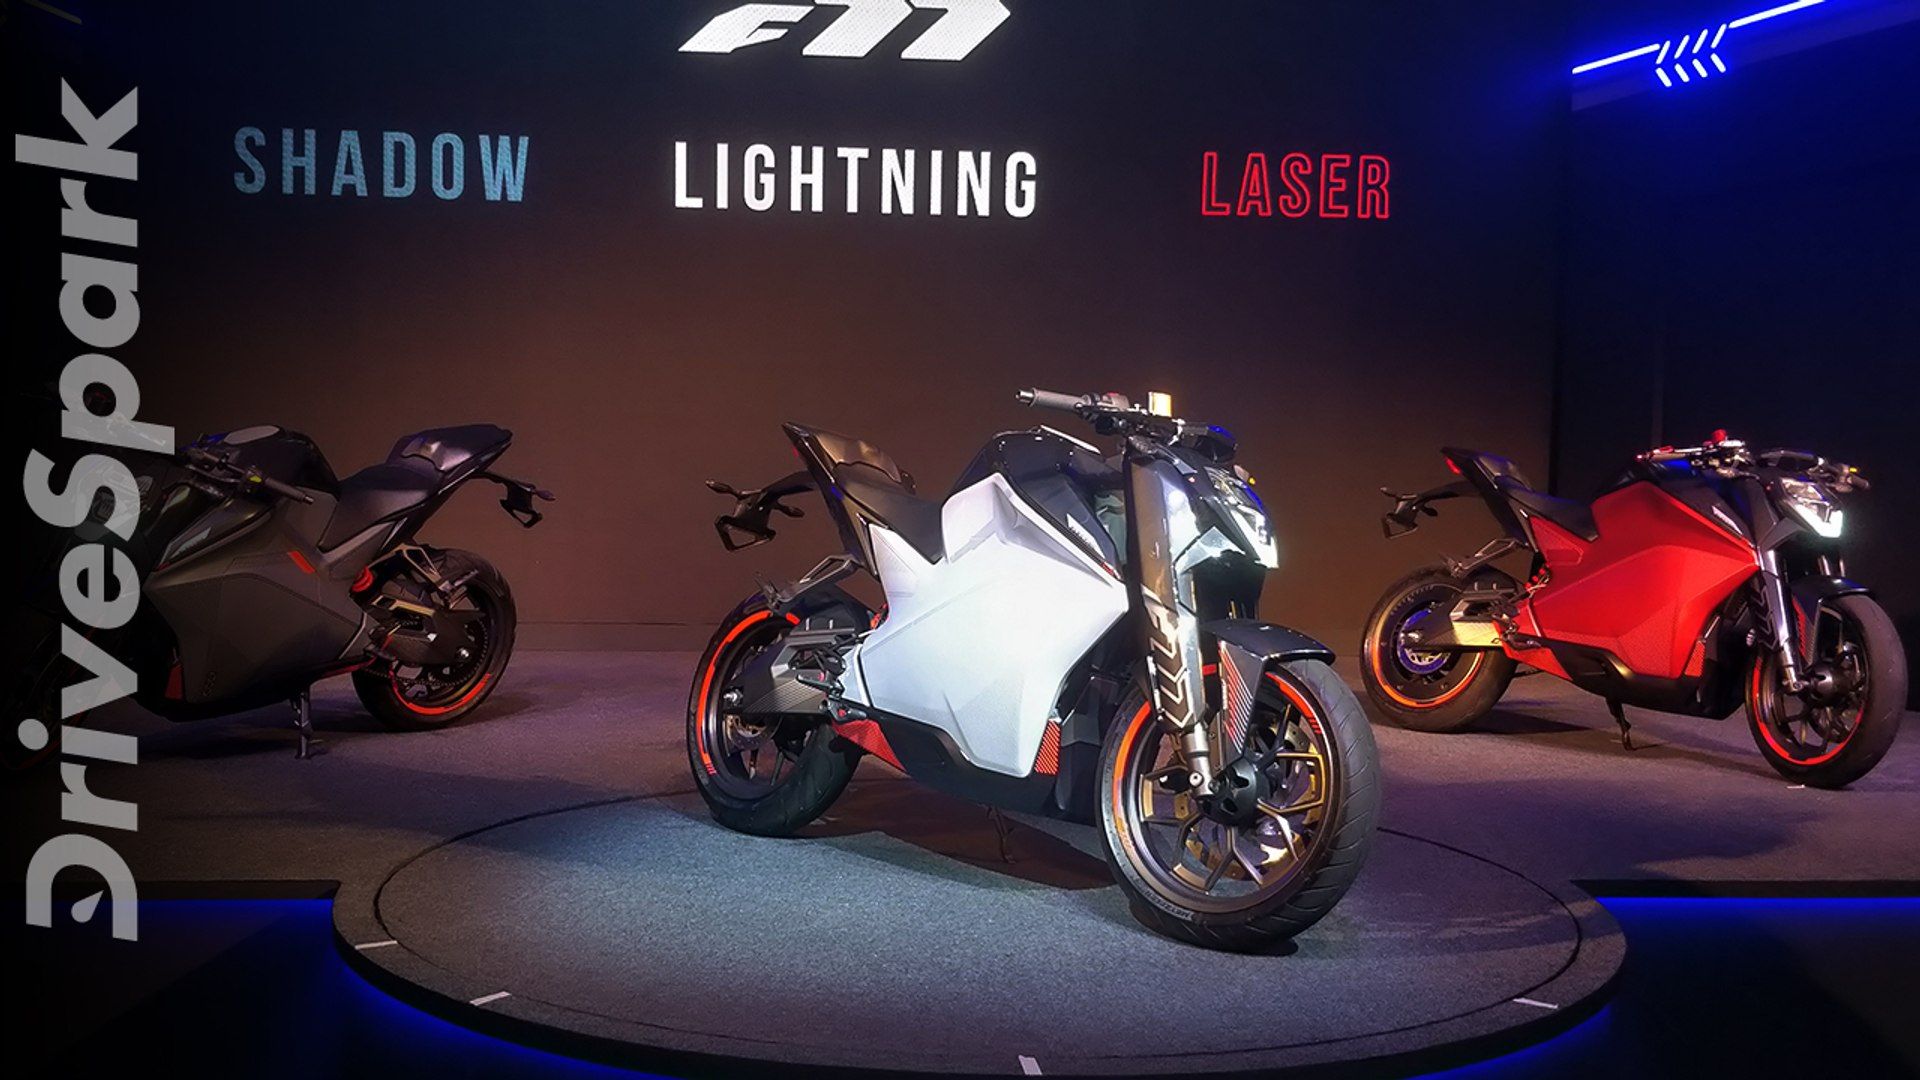 Ultraviolette F77 Performance Electric Bike Launched In India. Walkaround Video: Price, Battery Range, Features & Details